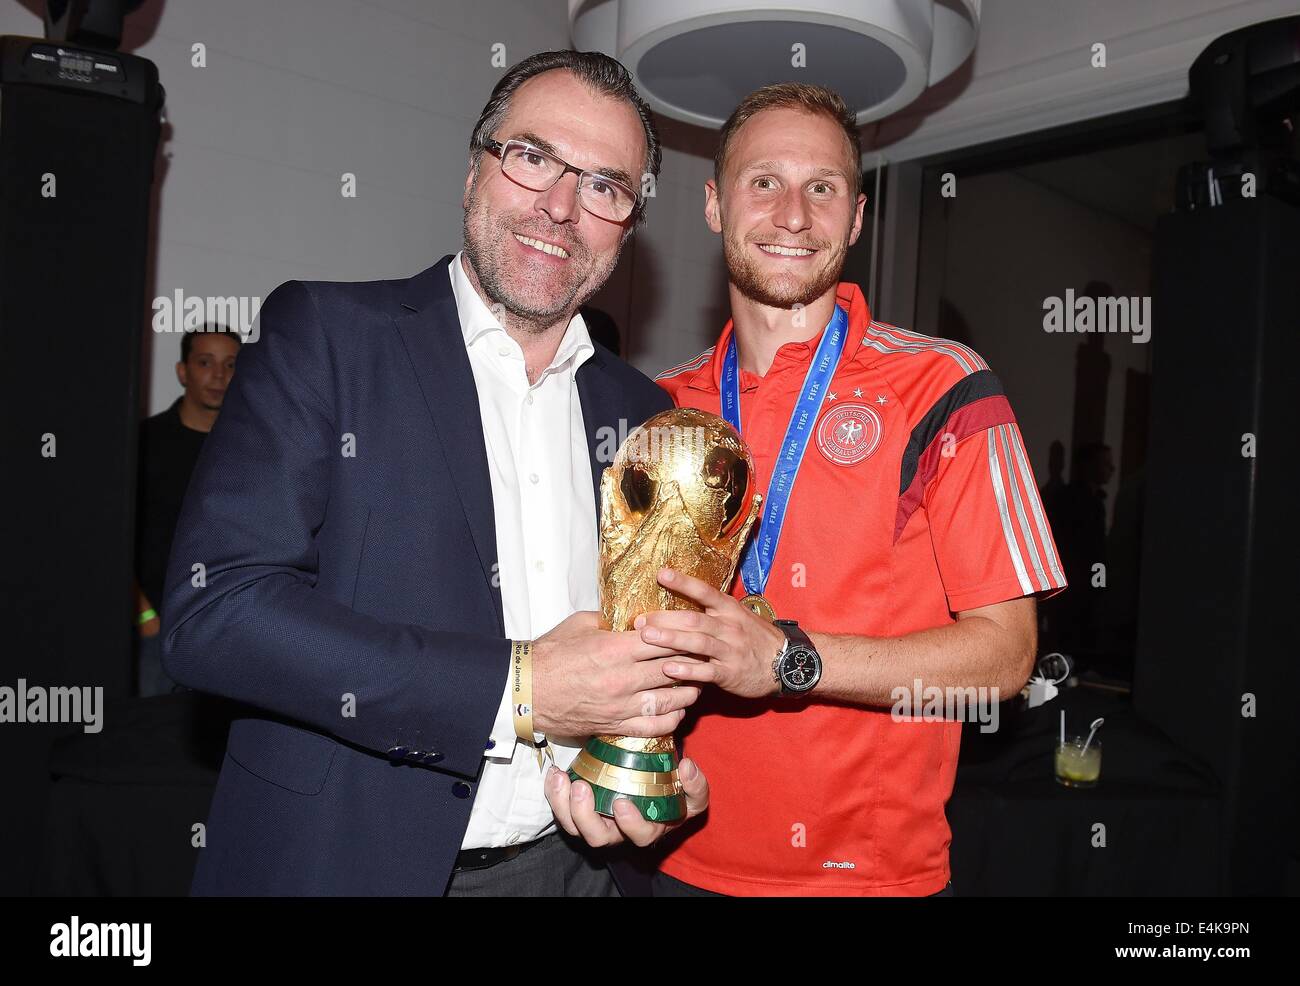 Handout: Rio de Janeiro, Brazil. 14th July, 2014. Benedikt Hoewedes (R) and the chairman of the supervisory board of FC Schalke 04, Clemens Toennies, celebrating Germany's victory in the Soccer World Cup with the trophy at Hotel Sheraton in Rio De Janeiro, Brazil on 13 July 2014. Germany won 1-0 against Argentina in the FIFA World Cup 2014 Final match. (: Image for in connection with the current reporting on the World Cup and together with the source: Photo: Markus Gilliar/DFB/dpa.) Credit:  dpa picture alliance/Alamy Live News Stock Photo